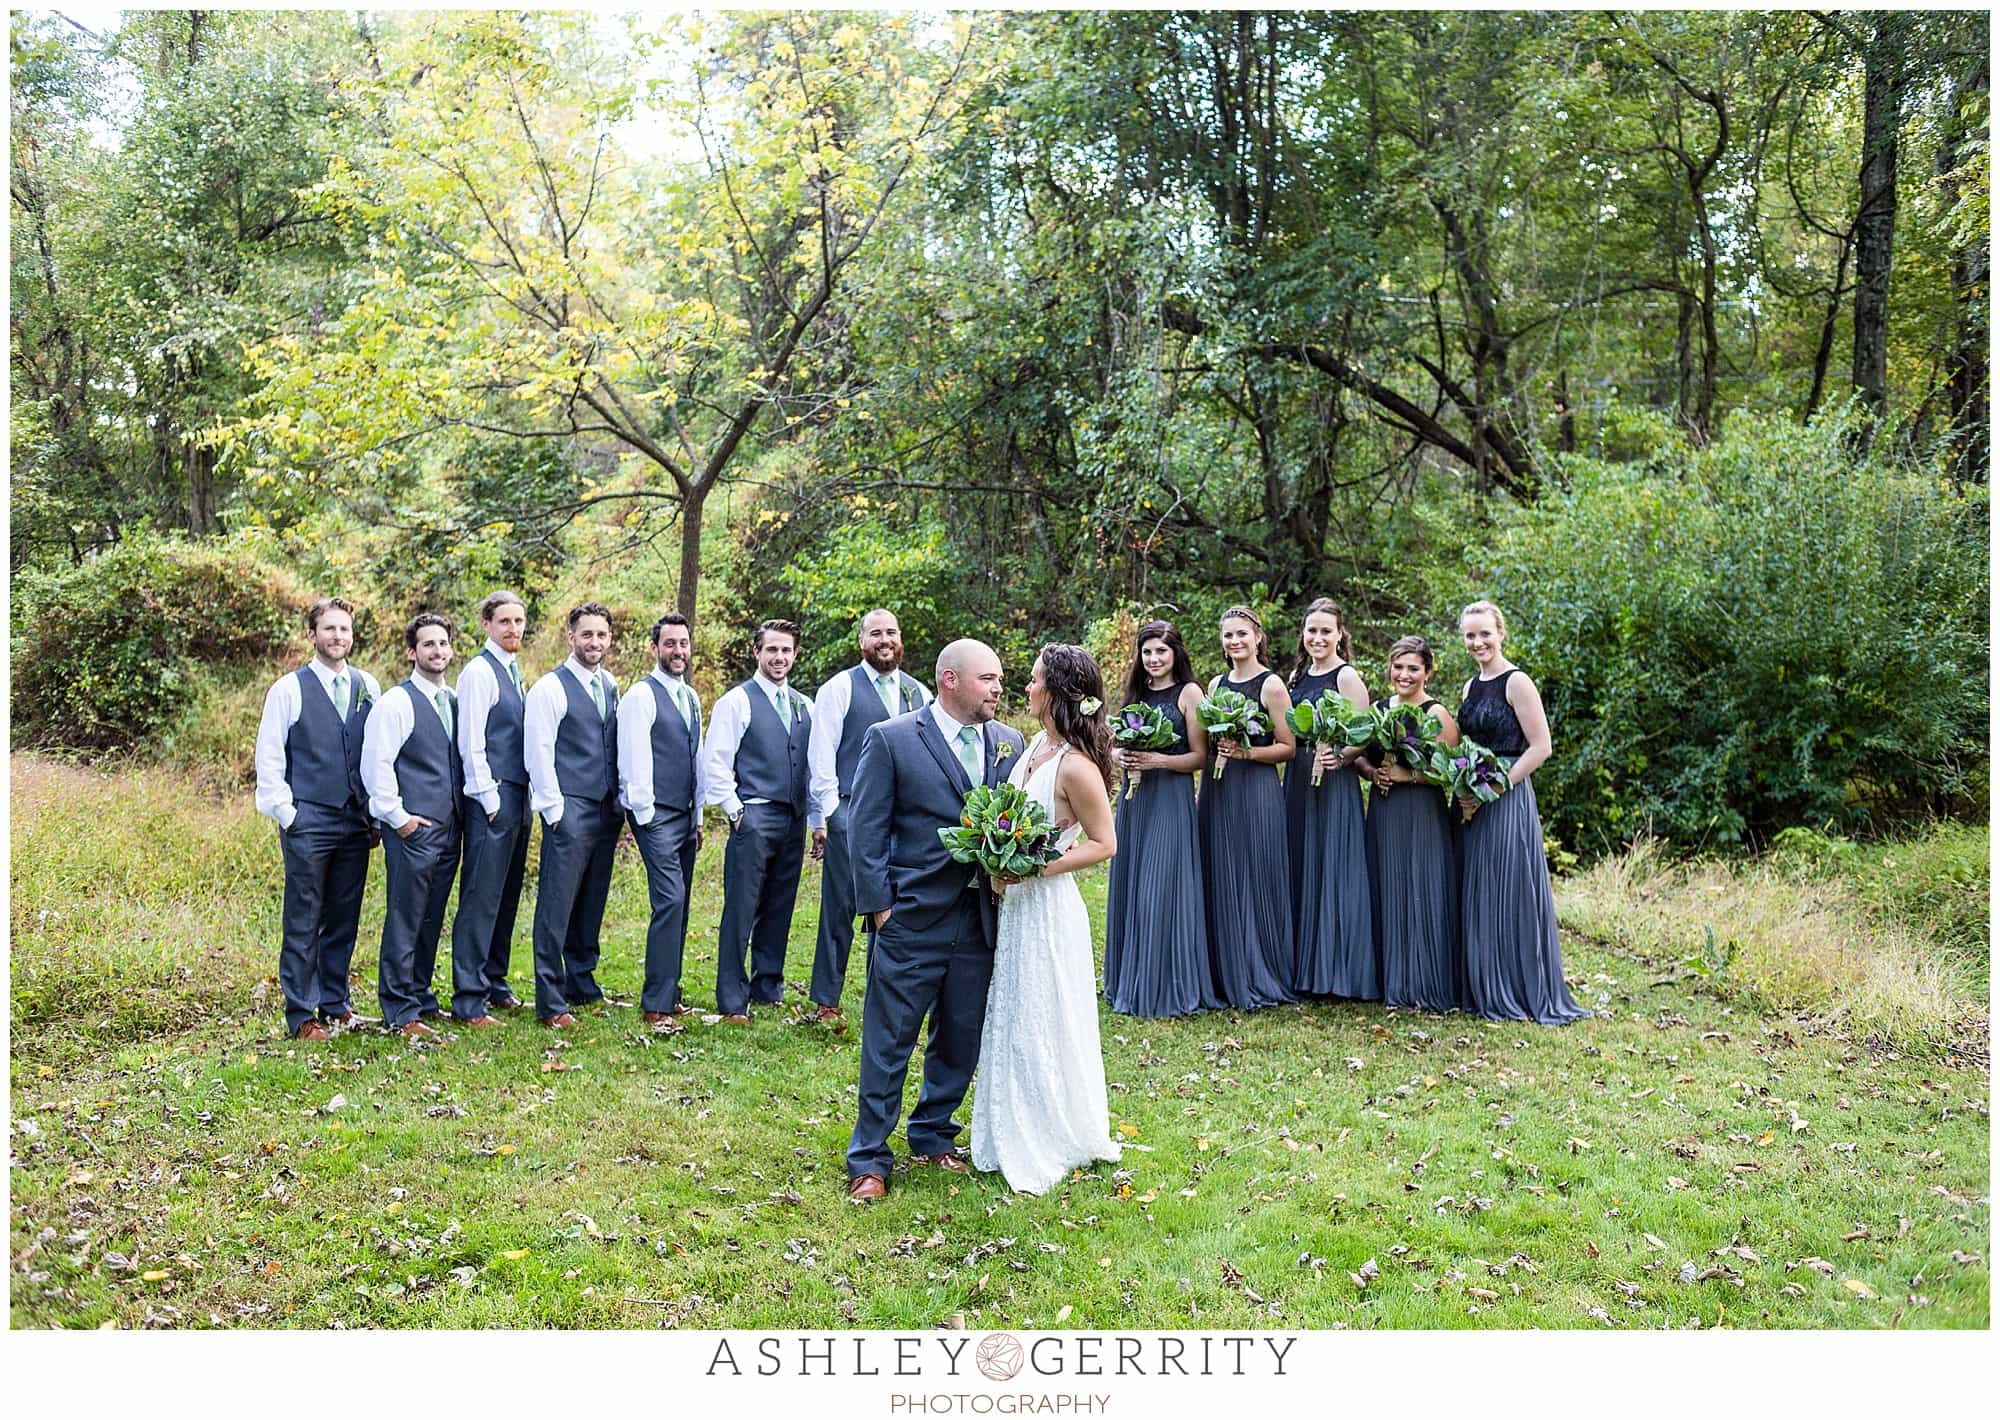 Bride & groom with their wedding party, groomsmen dressed in blueish grey vests & pants, bridemaids in deep periwinkle full length gowns, carrying vegetable bouquets